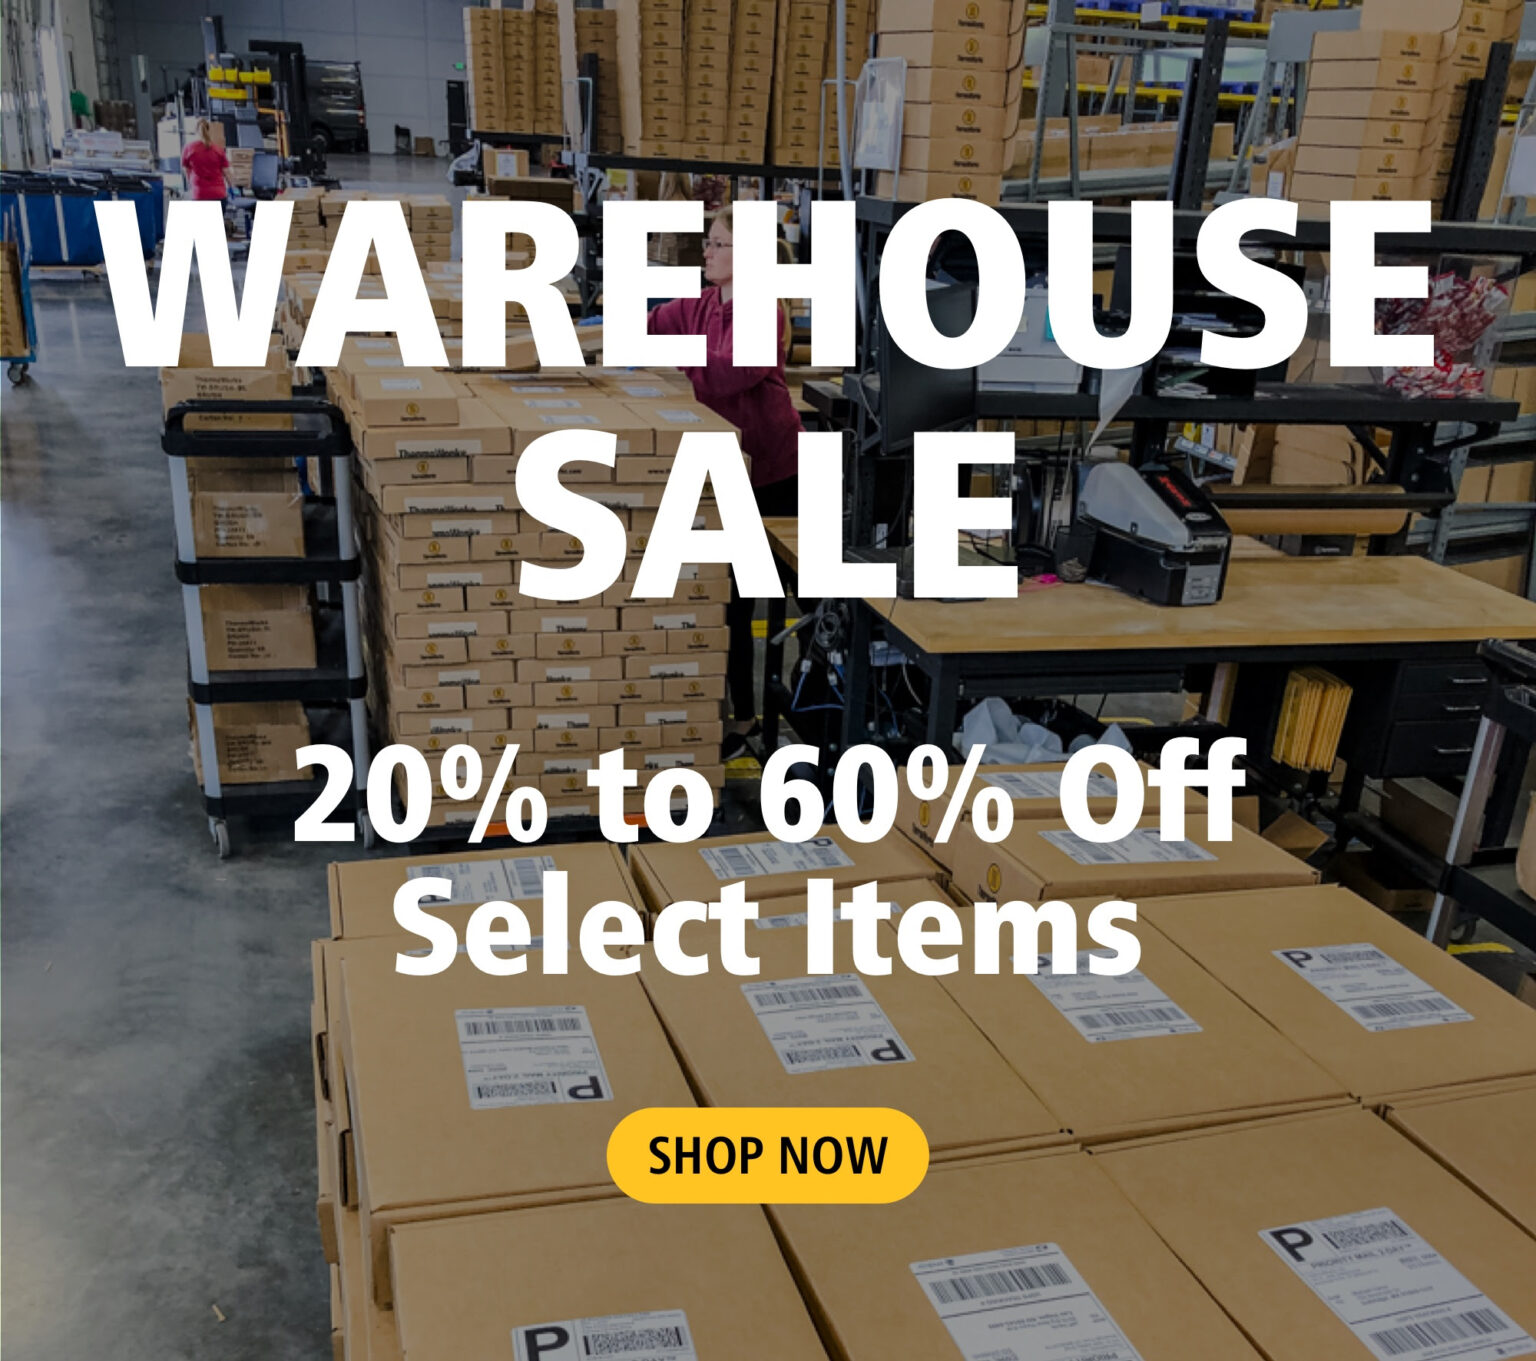 ThermoWorks Warehouse Sale – 20% to 60% Off! | Homebrew Finds